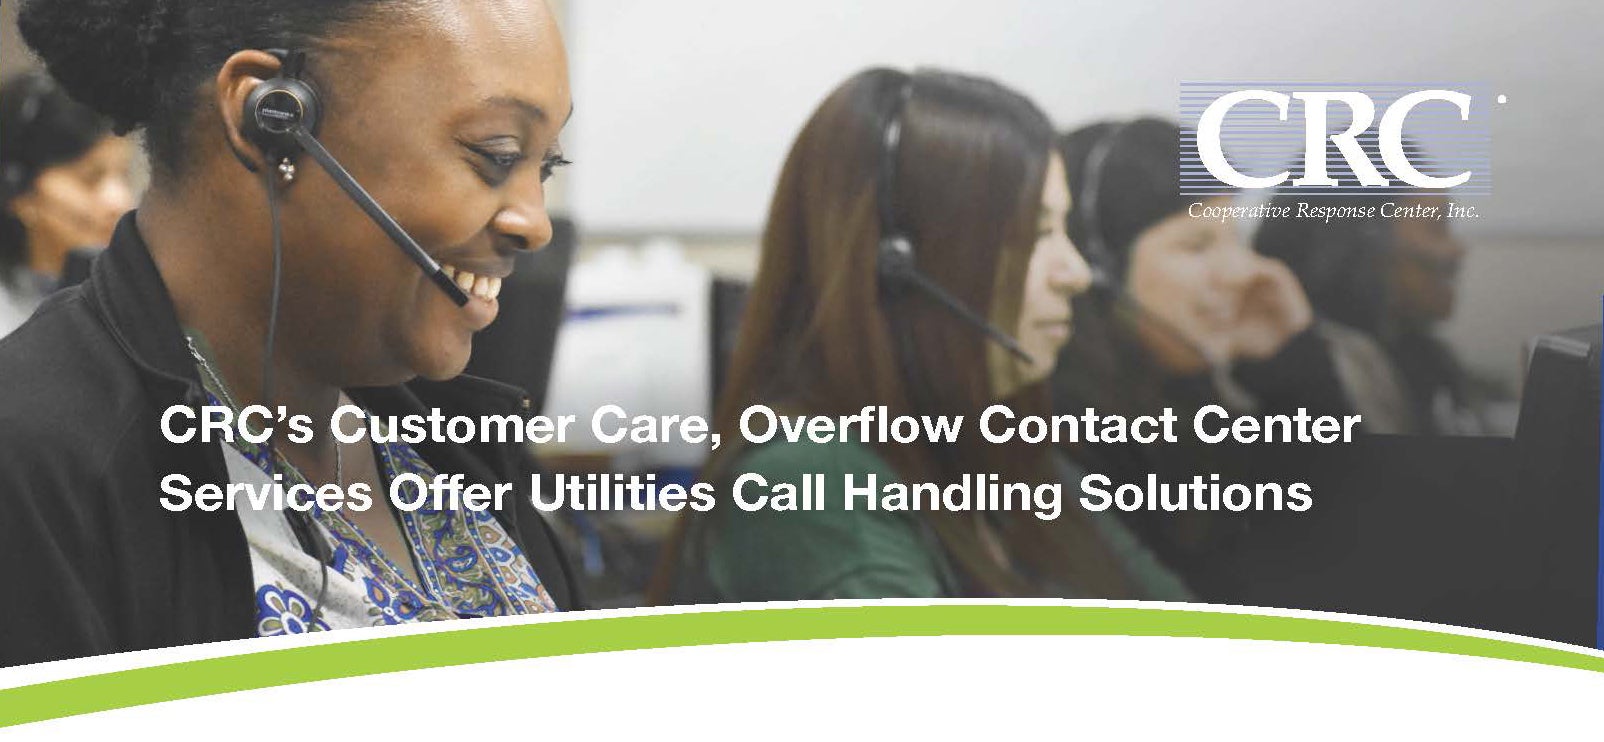 CRC's Customer Care, Overflow Contact Center Services Offer Utilities Call Handling Solutions